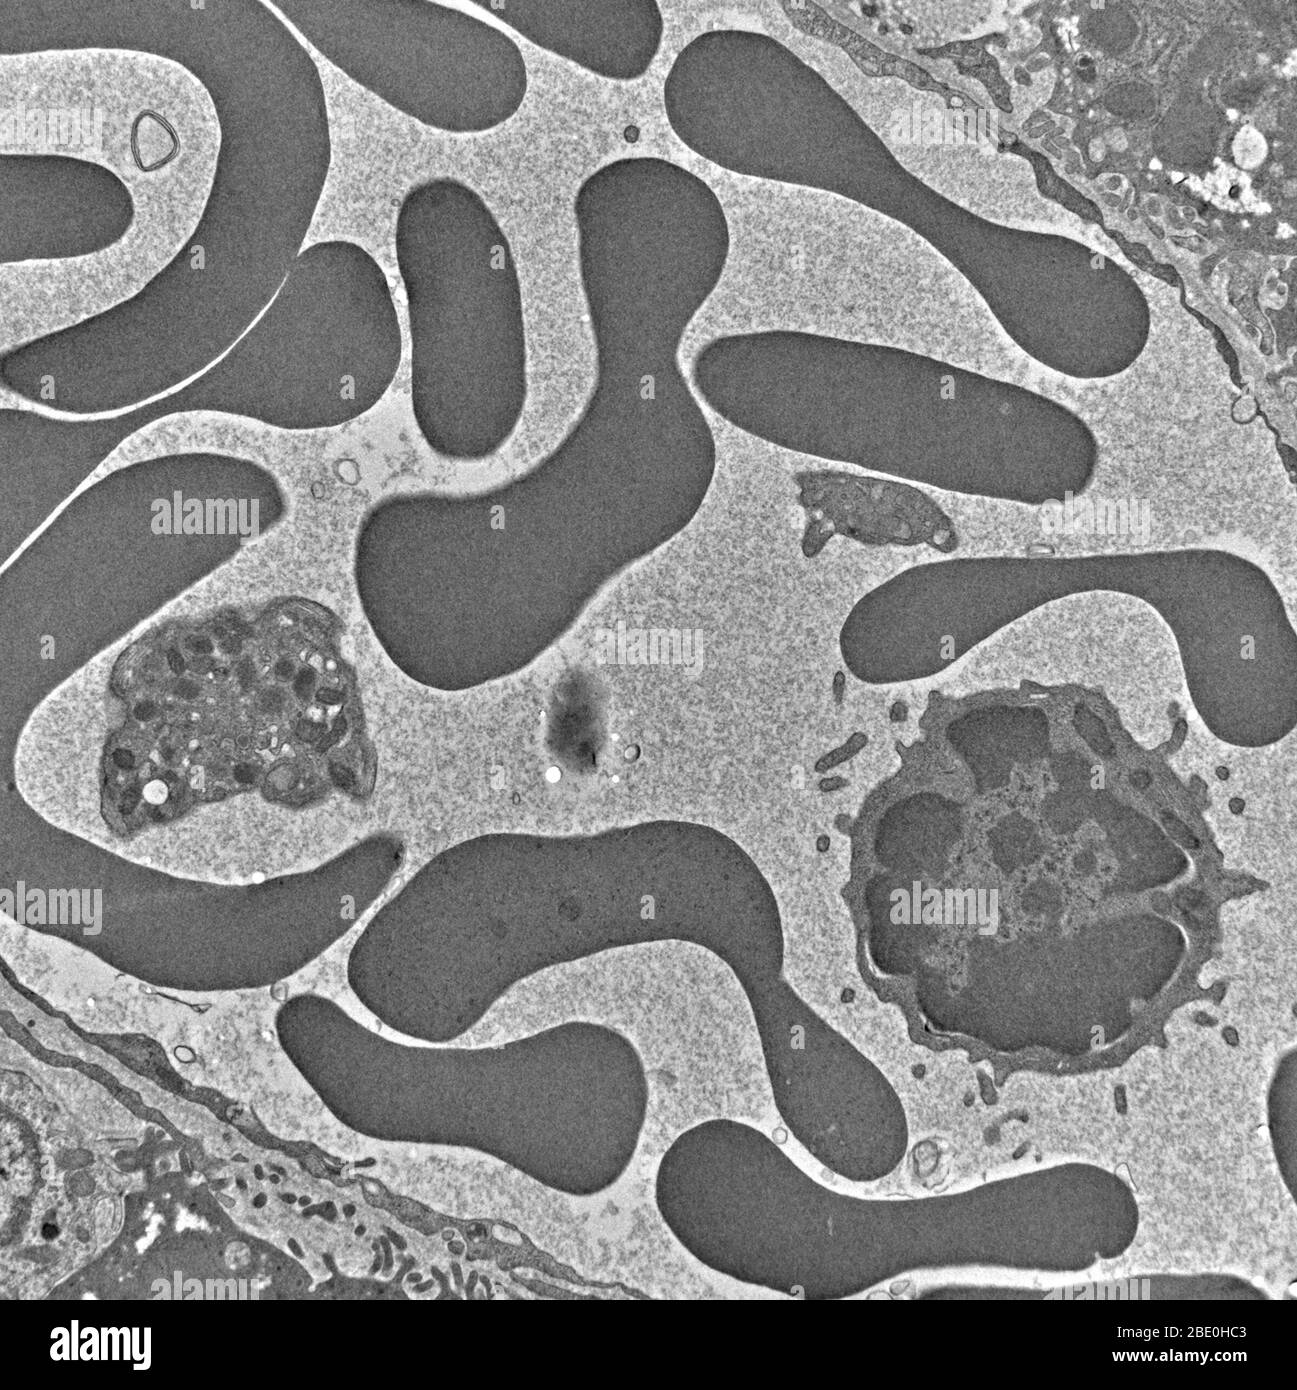 Transmission Electron Micrograph (TEM) of blood sample, showing red blood cells, platelet and white blood cell (lymphocyte). Magnification unknown. Stock Photo